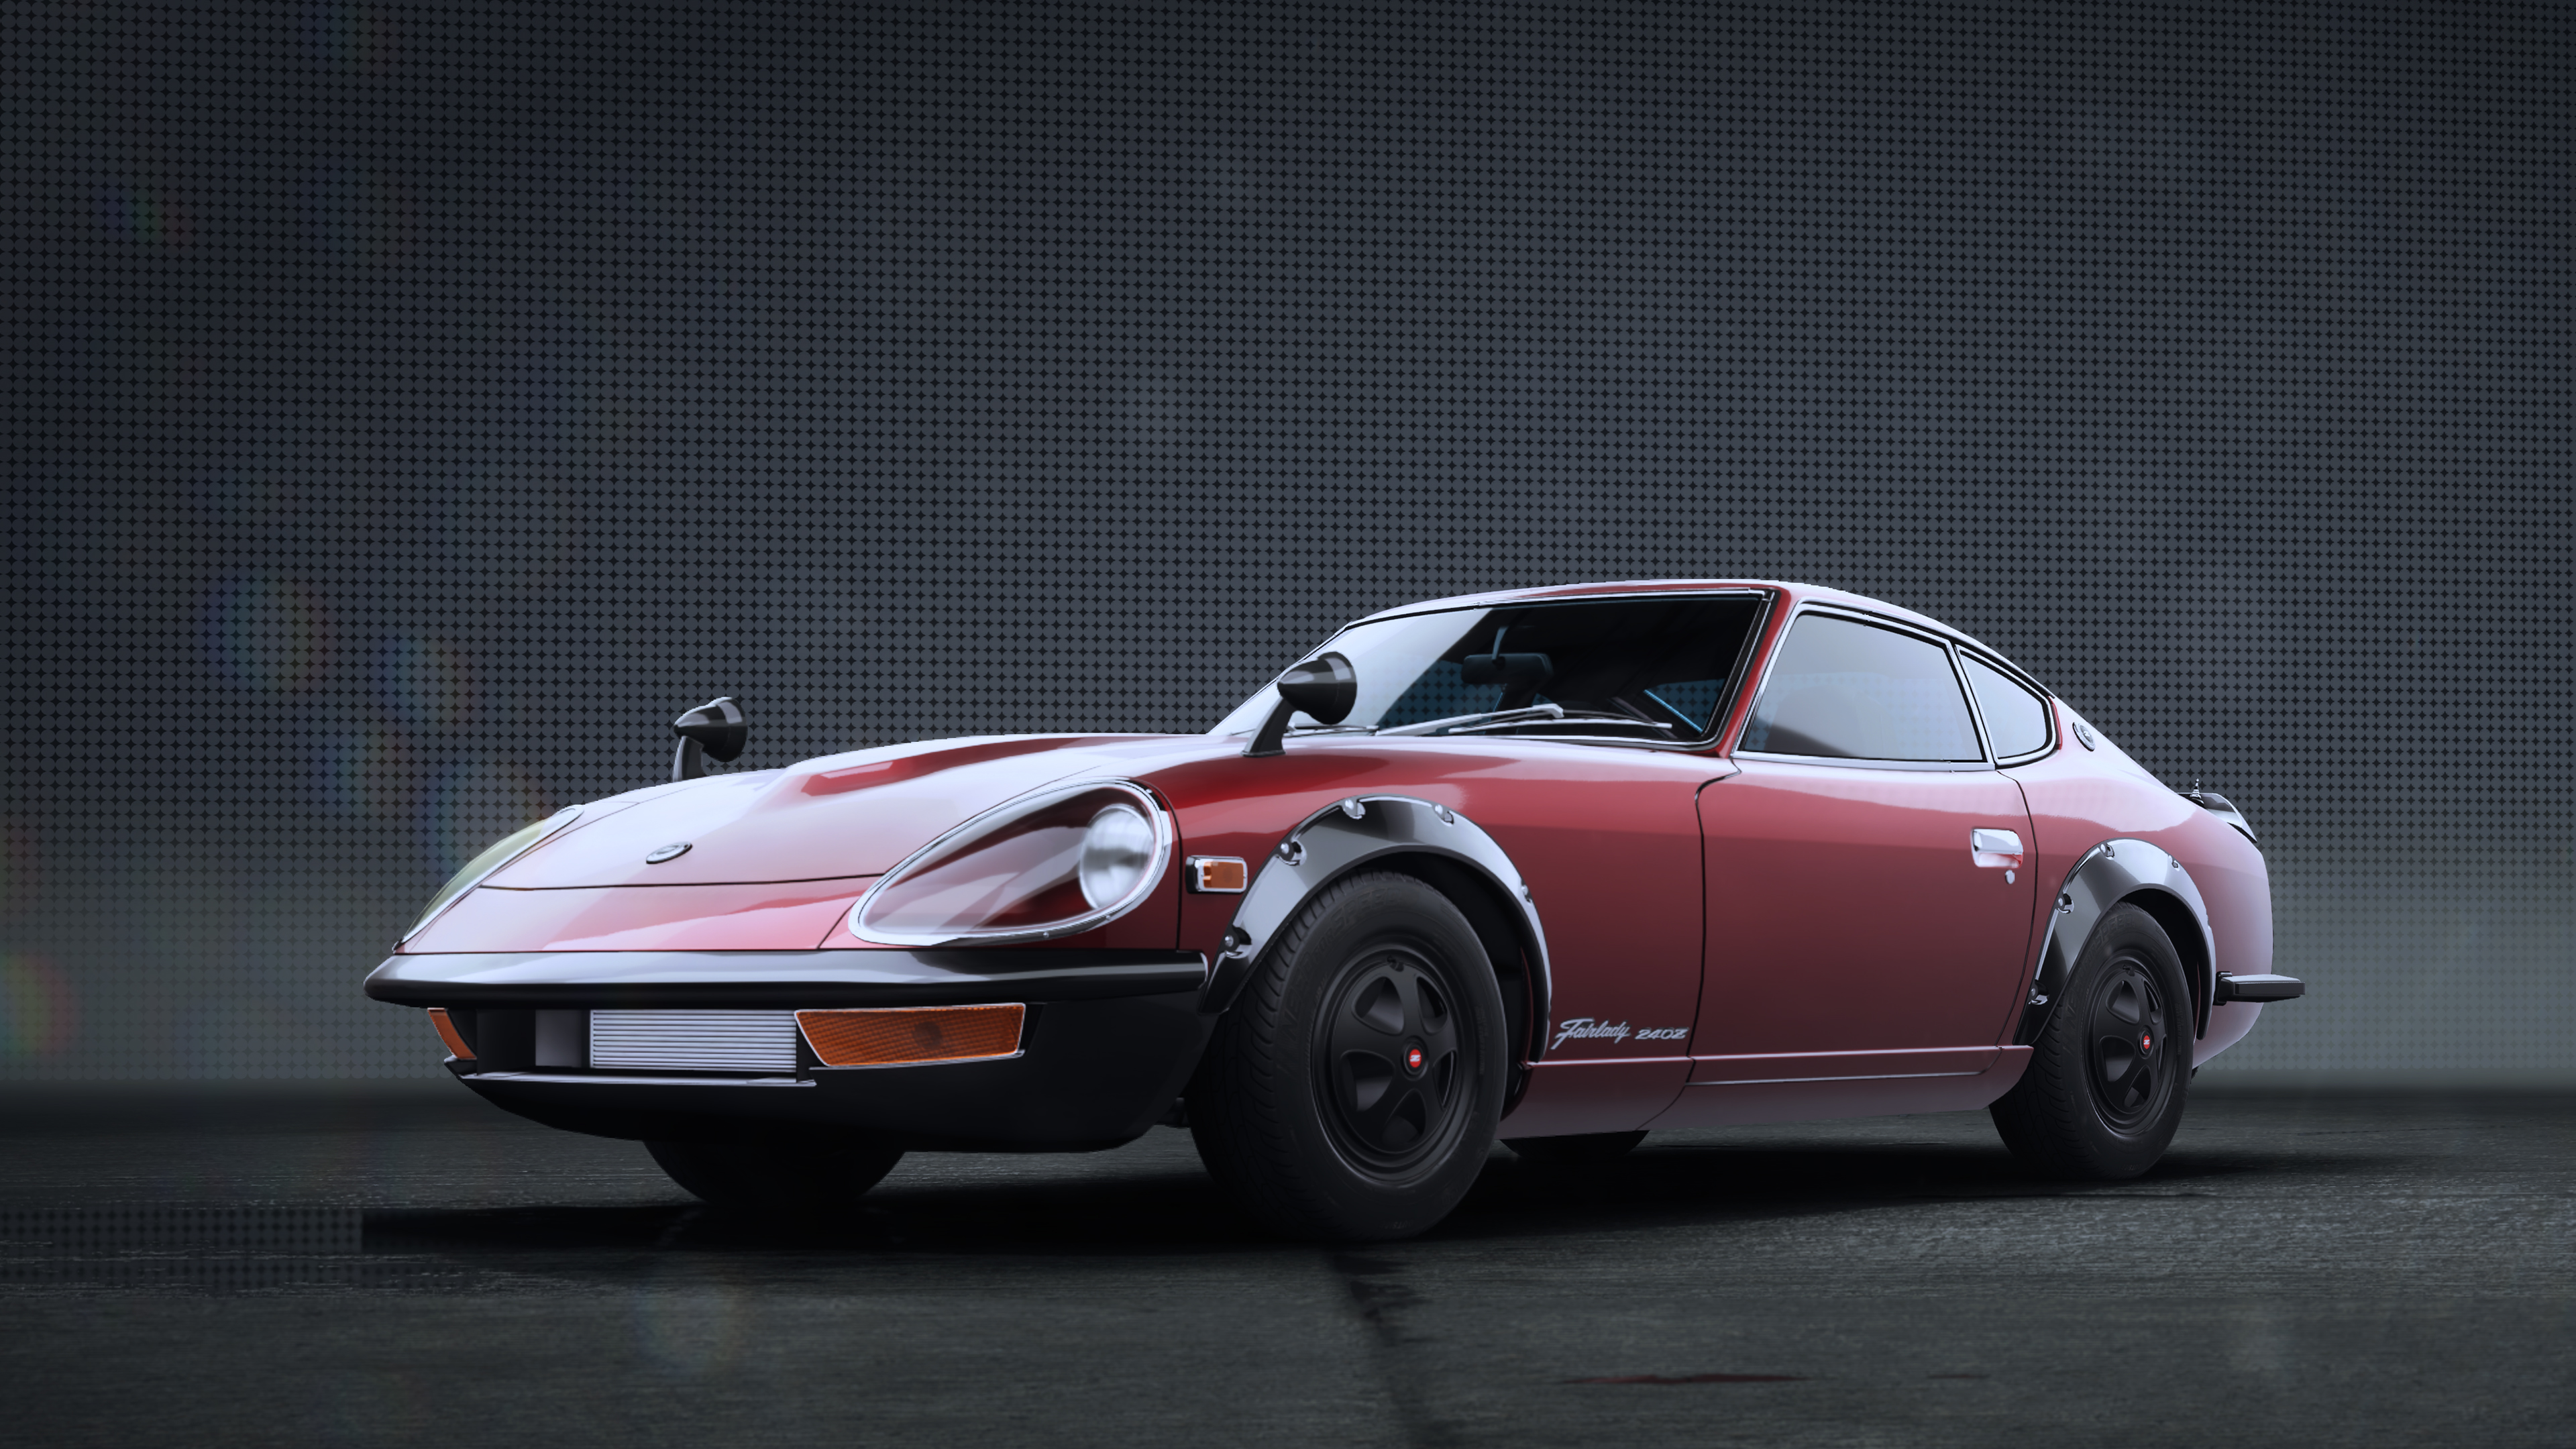 Nissan Fairlady 240ZG, Need for Speed Wiki